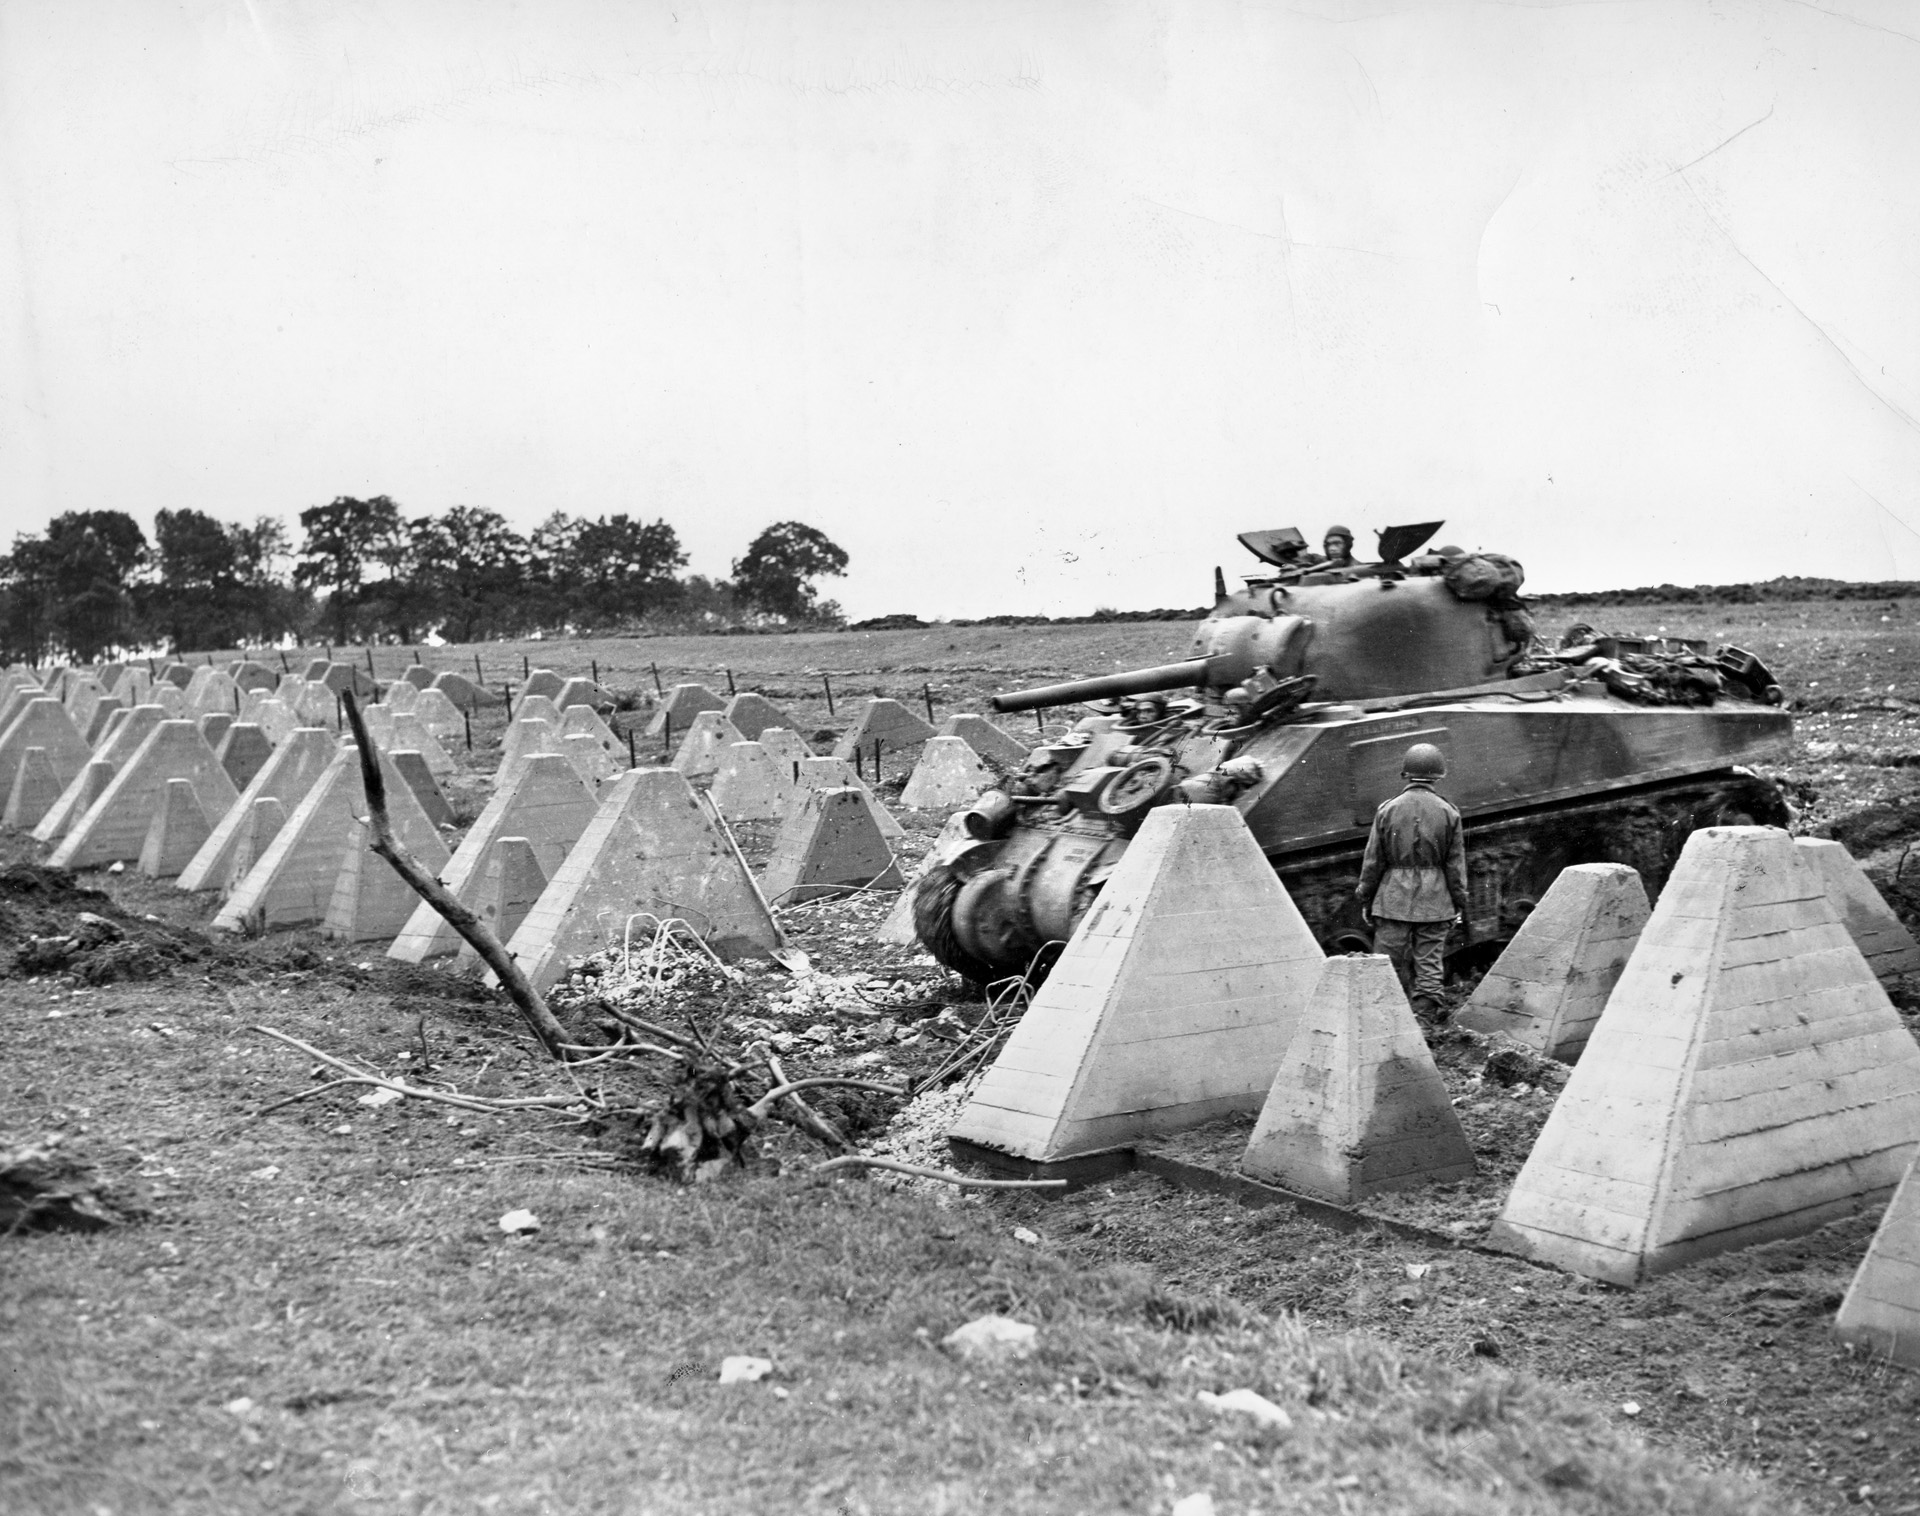 The Germans built formidable anti-tank obstacles called “dragon’s teeth” along their western border with France and Belgium, but the concrete barriers barely slowed American forces on their drive into the heart of the Third Reich.